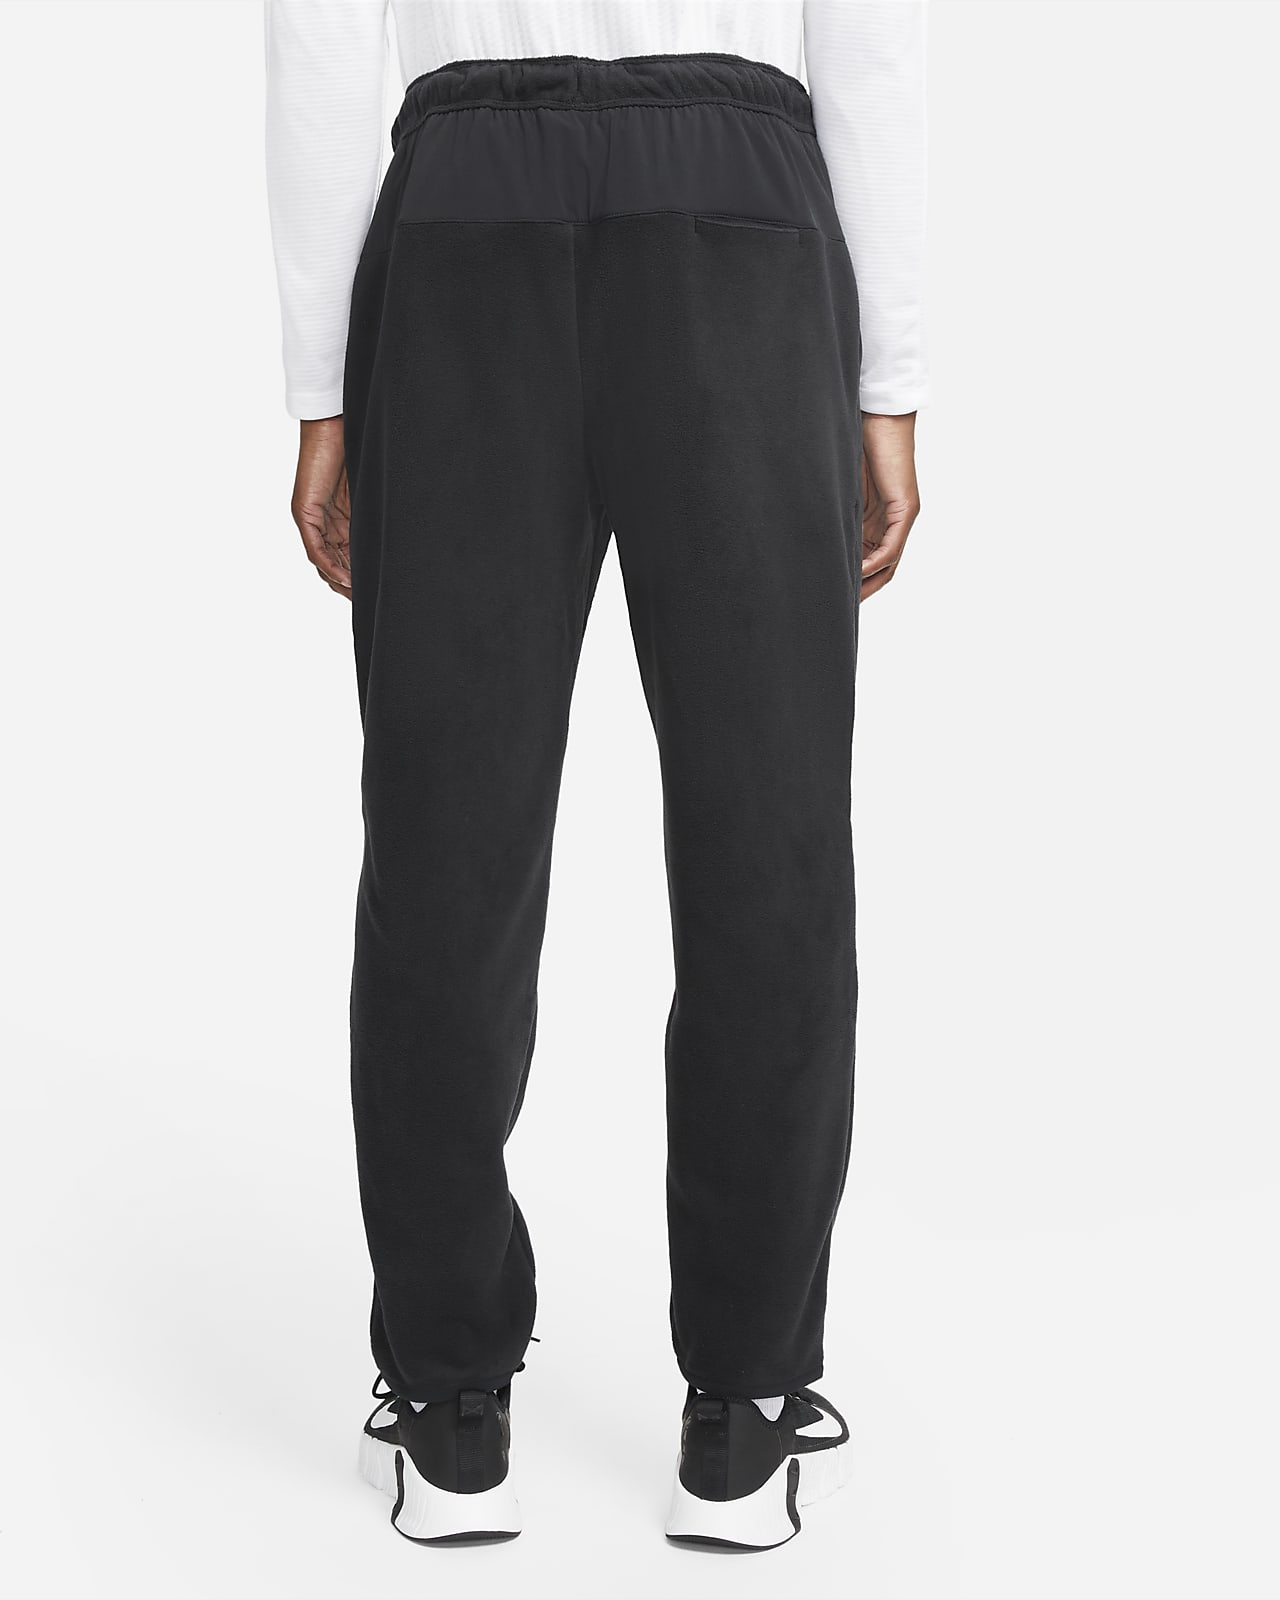 Nike Mens Therma Pants - Black | Life Style Sports IE